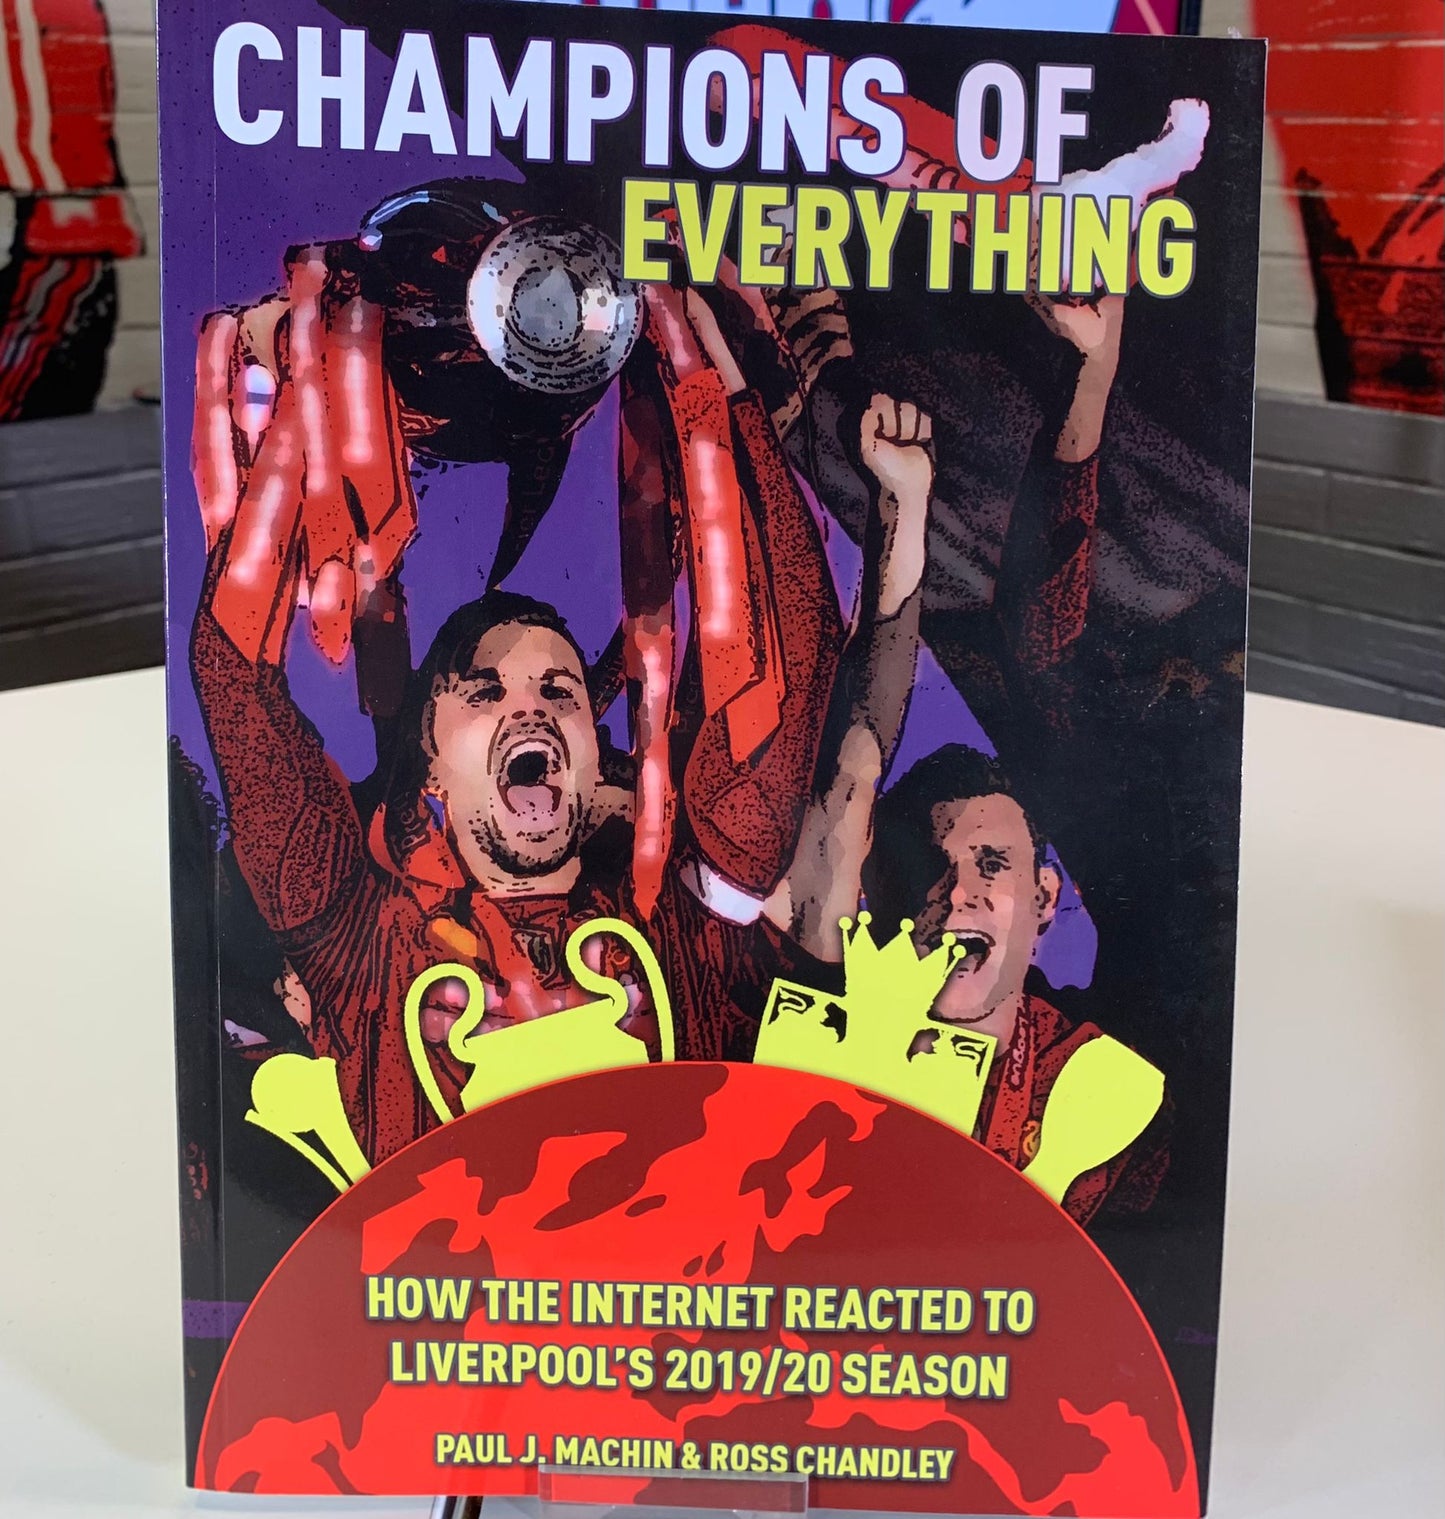 Champions Of Everything: How The Internet Reacted To Liverpool’s 2019/20